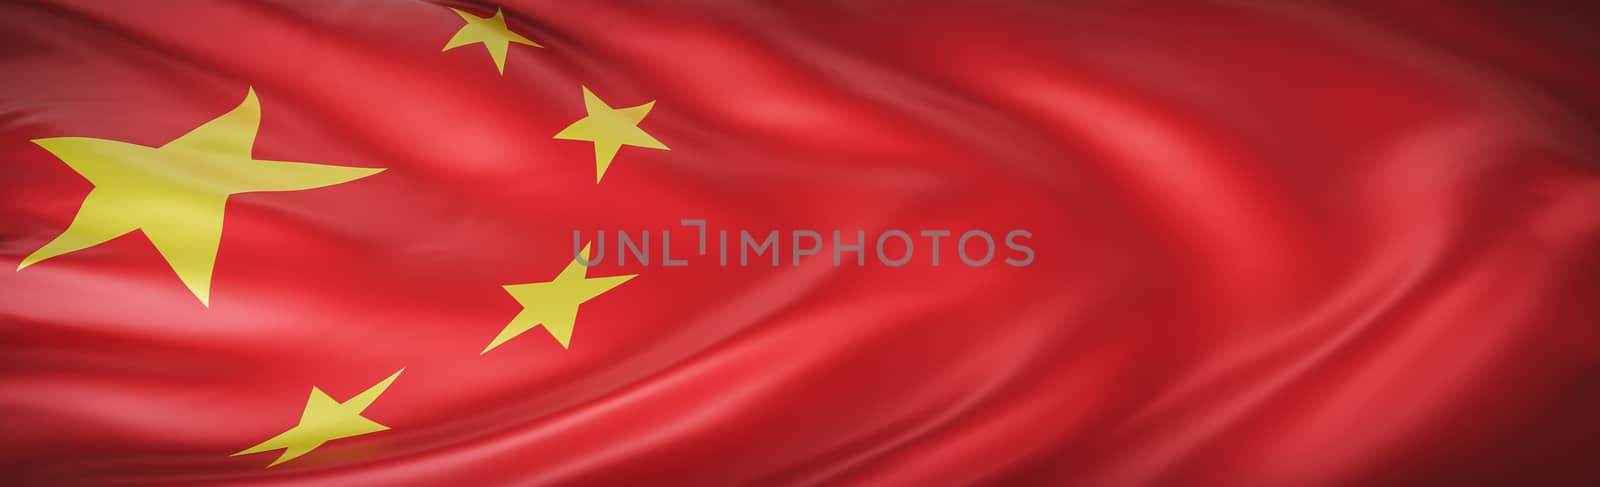 Beautiful China Flag Wave Close Up on banner background with copy space.,3d model and illustration. by anotestocker